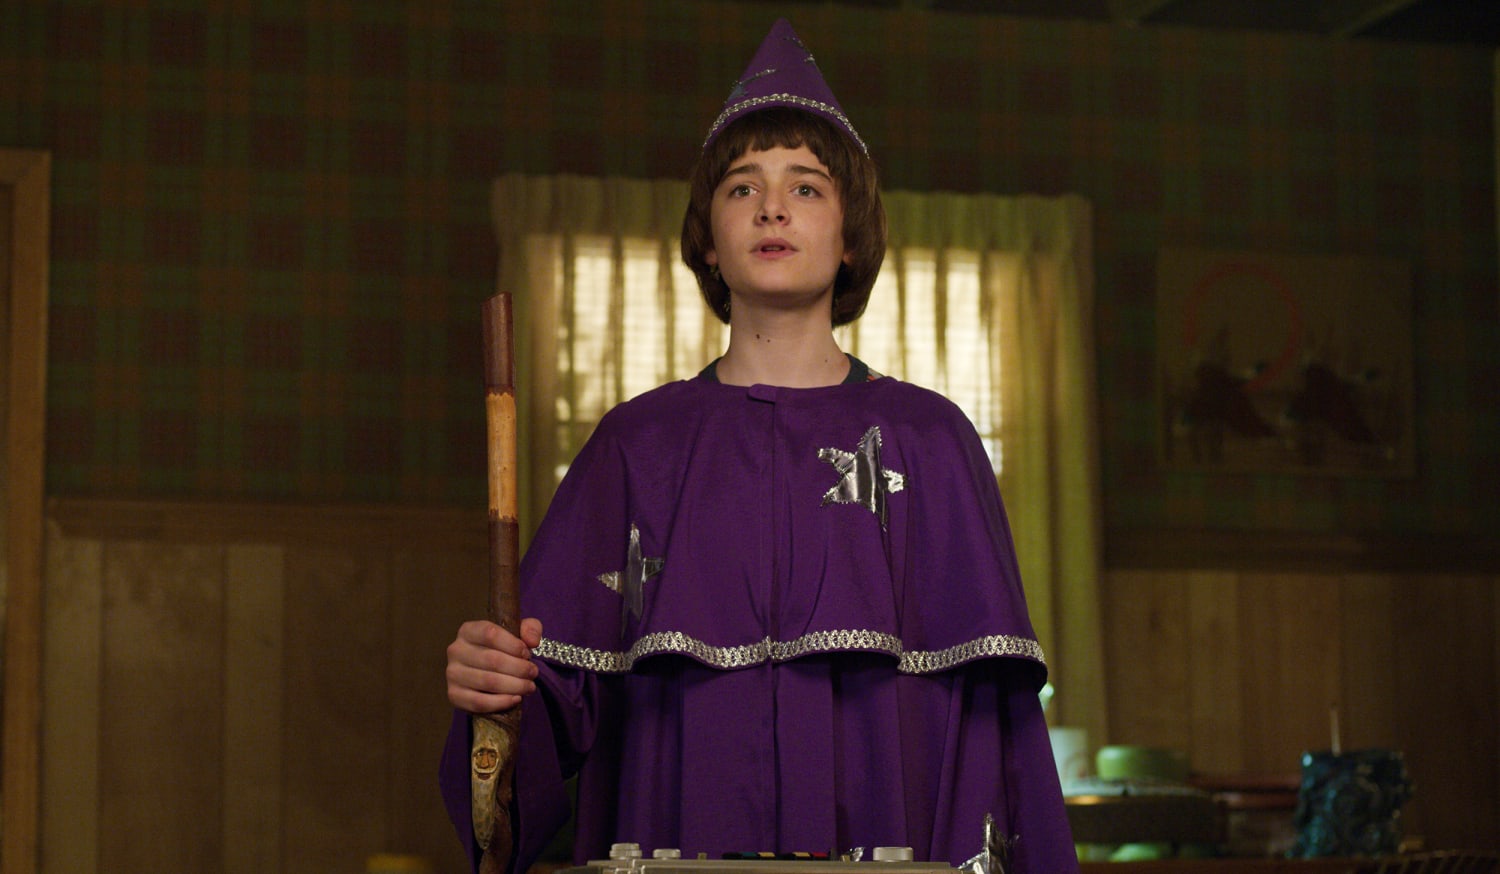 Stranger Things' star says character's sexuality 'up to interpretation